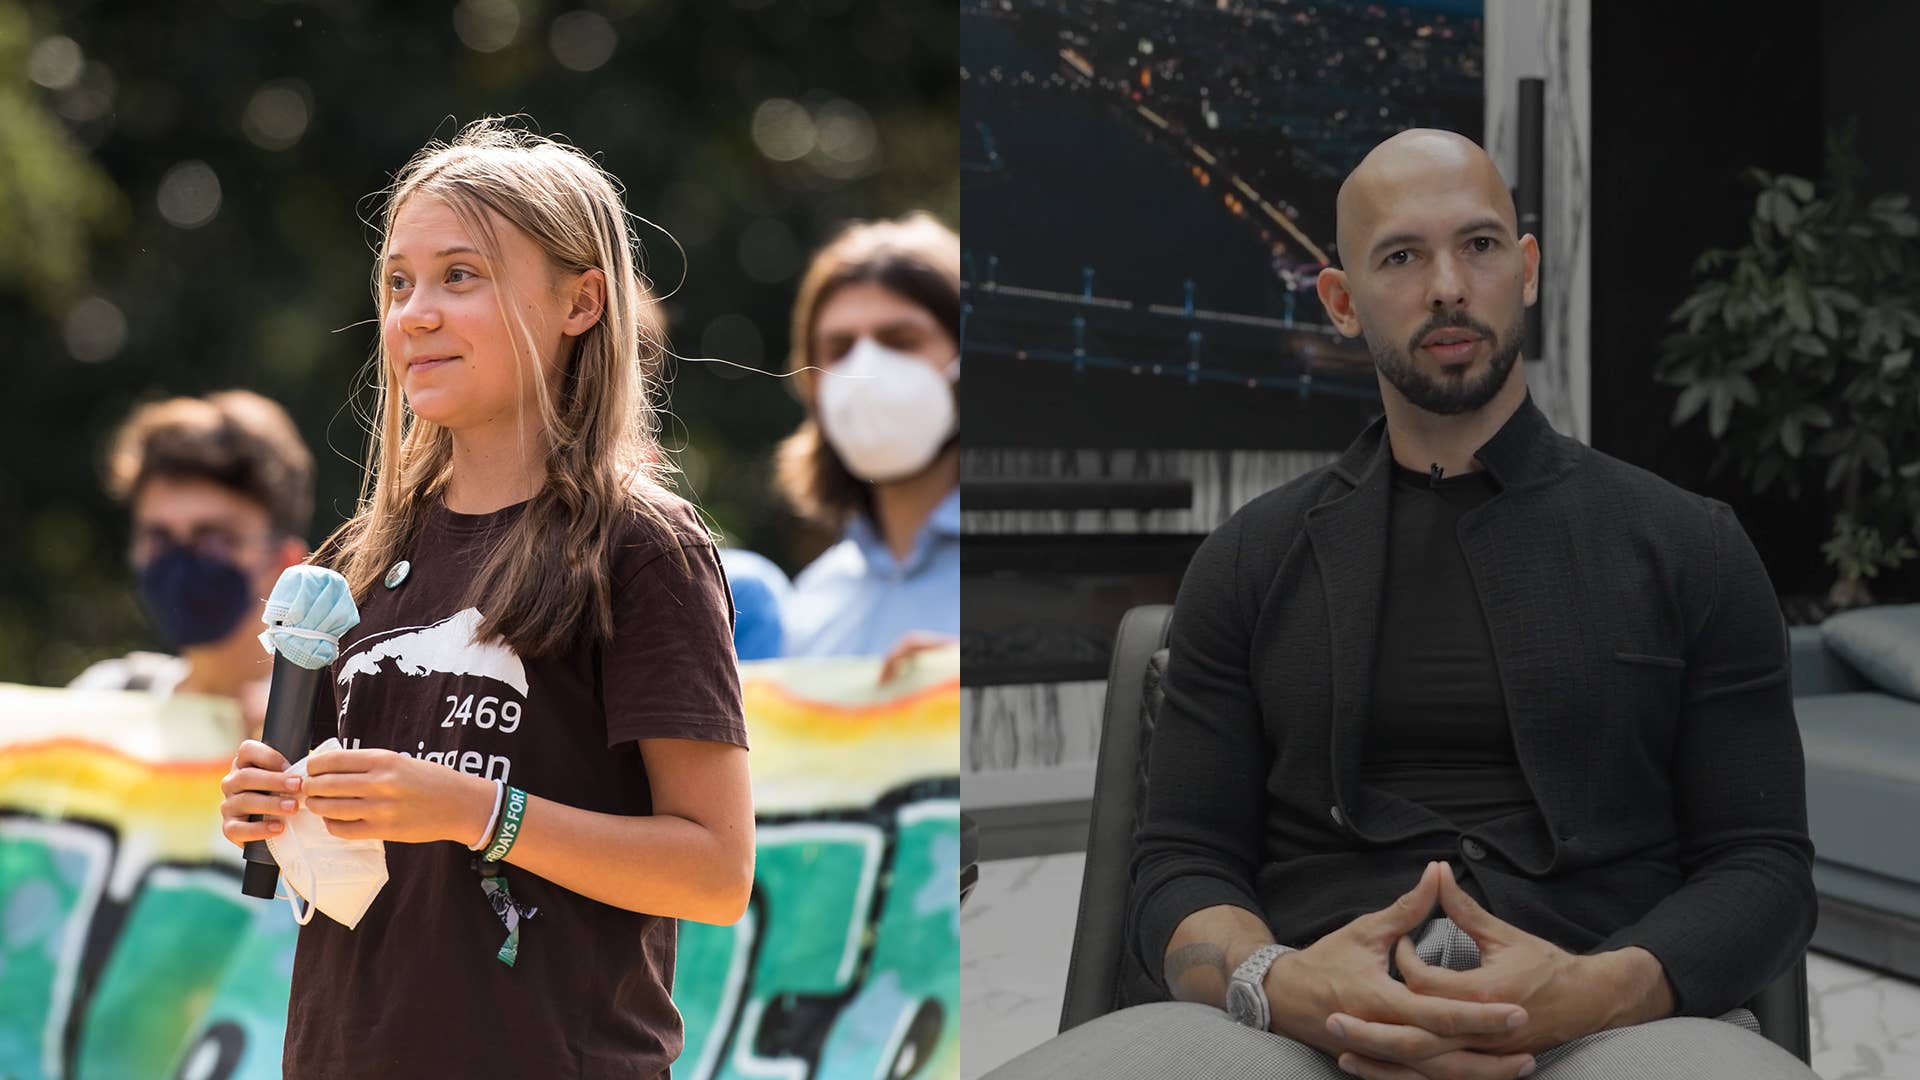 Greta Thunberg at the Fridays for Future parade in Milan, and Andrew Tate in a screenshot from a video addressing his YouTube ban